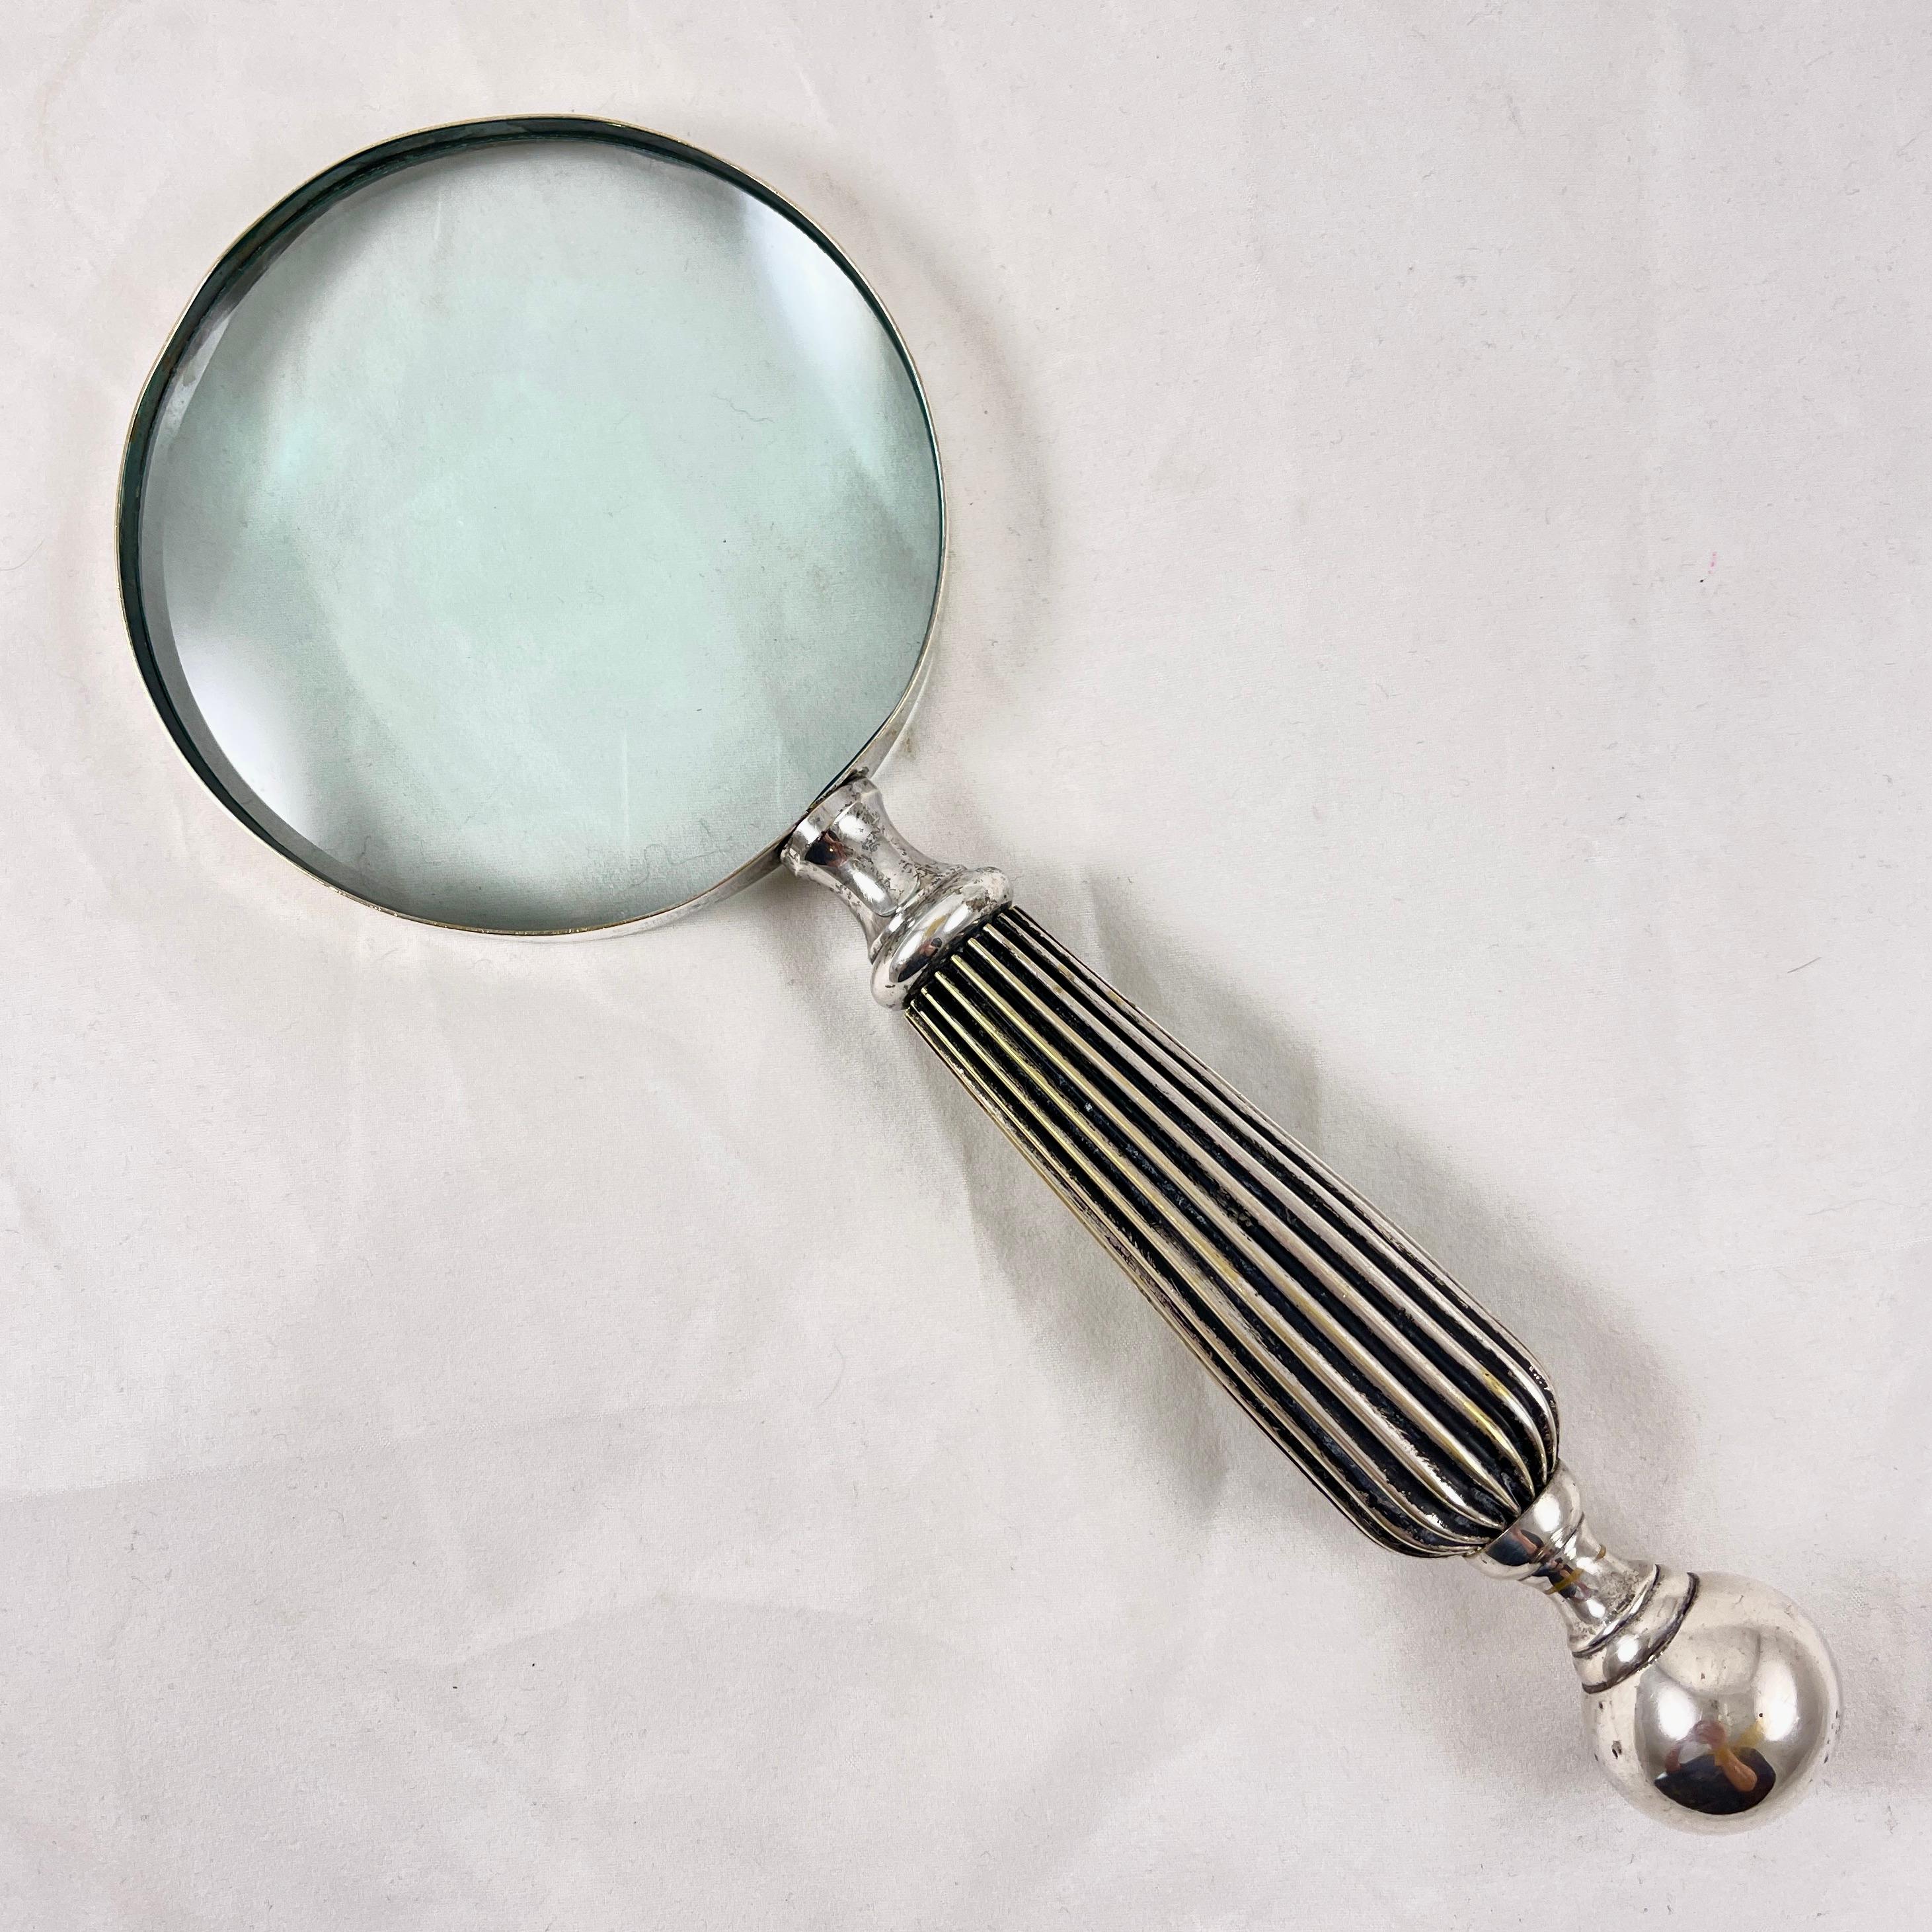 A substantial, silver plated hand-held magnifying glass, circa 1980s.

Perfect for the desk top or a library, this heavy magnifying has a ribbed metal handle terminating in a solid ball. Securely attached to a silver rimmed round glass.

10 in. L x